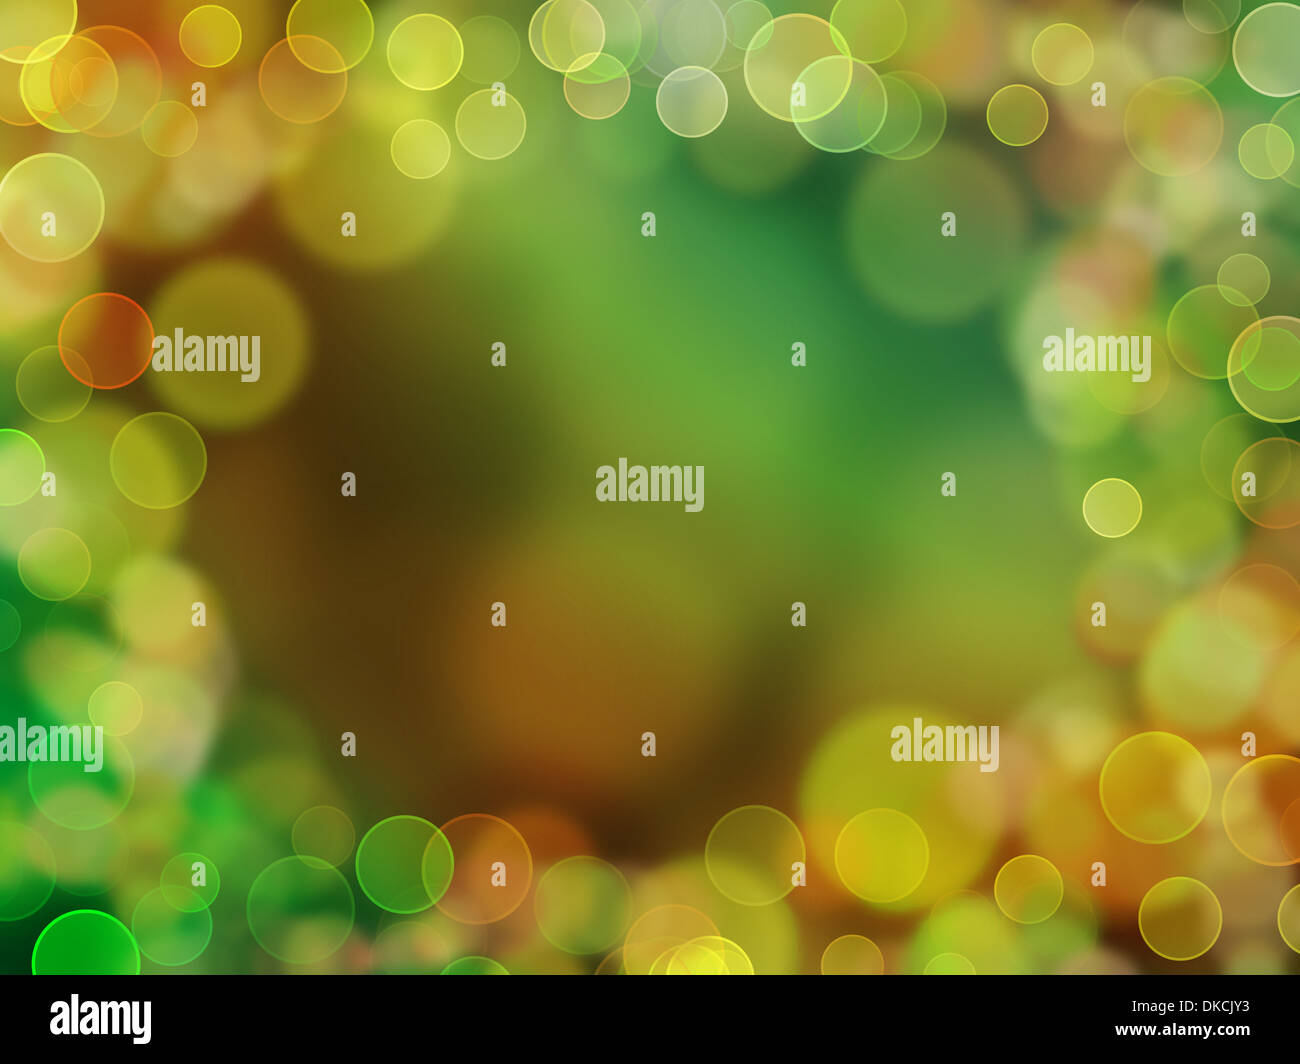 Background of blurred circle lights Stock Photo